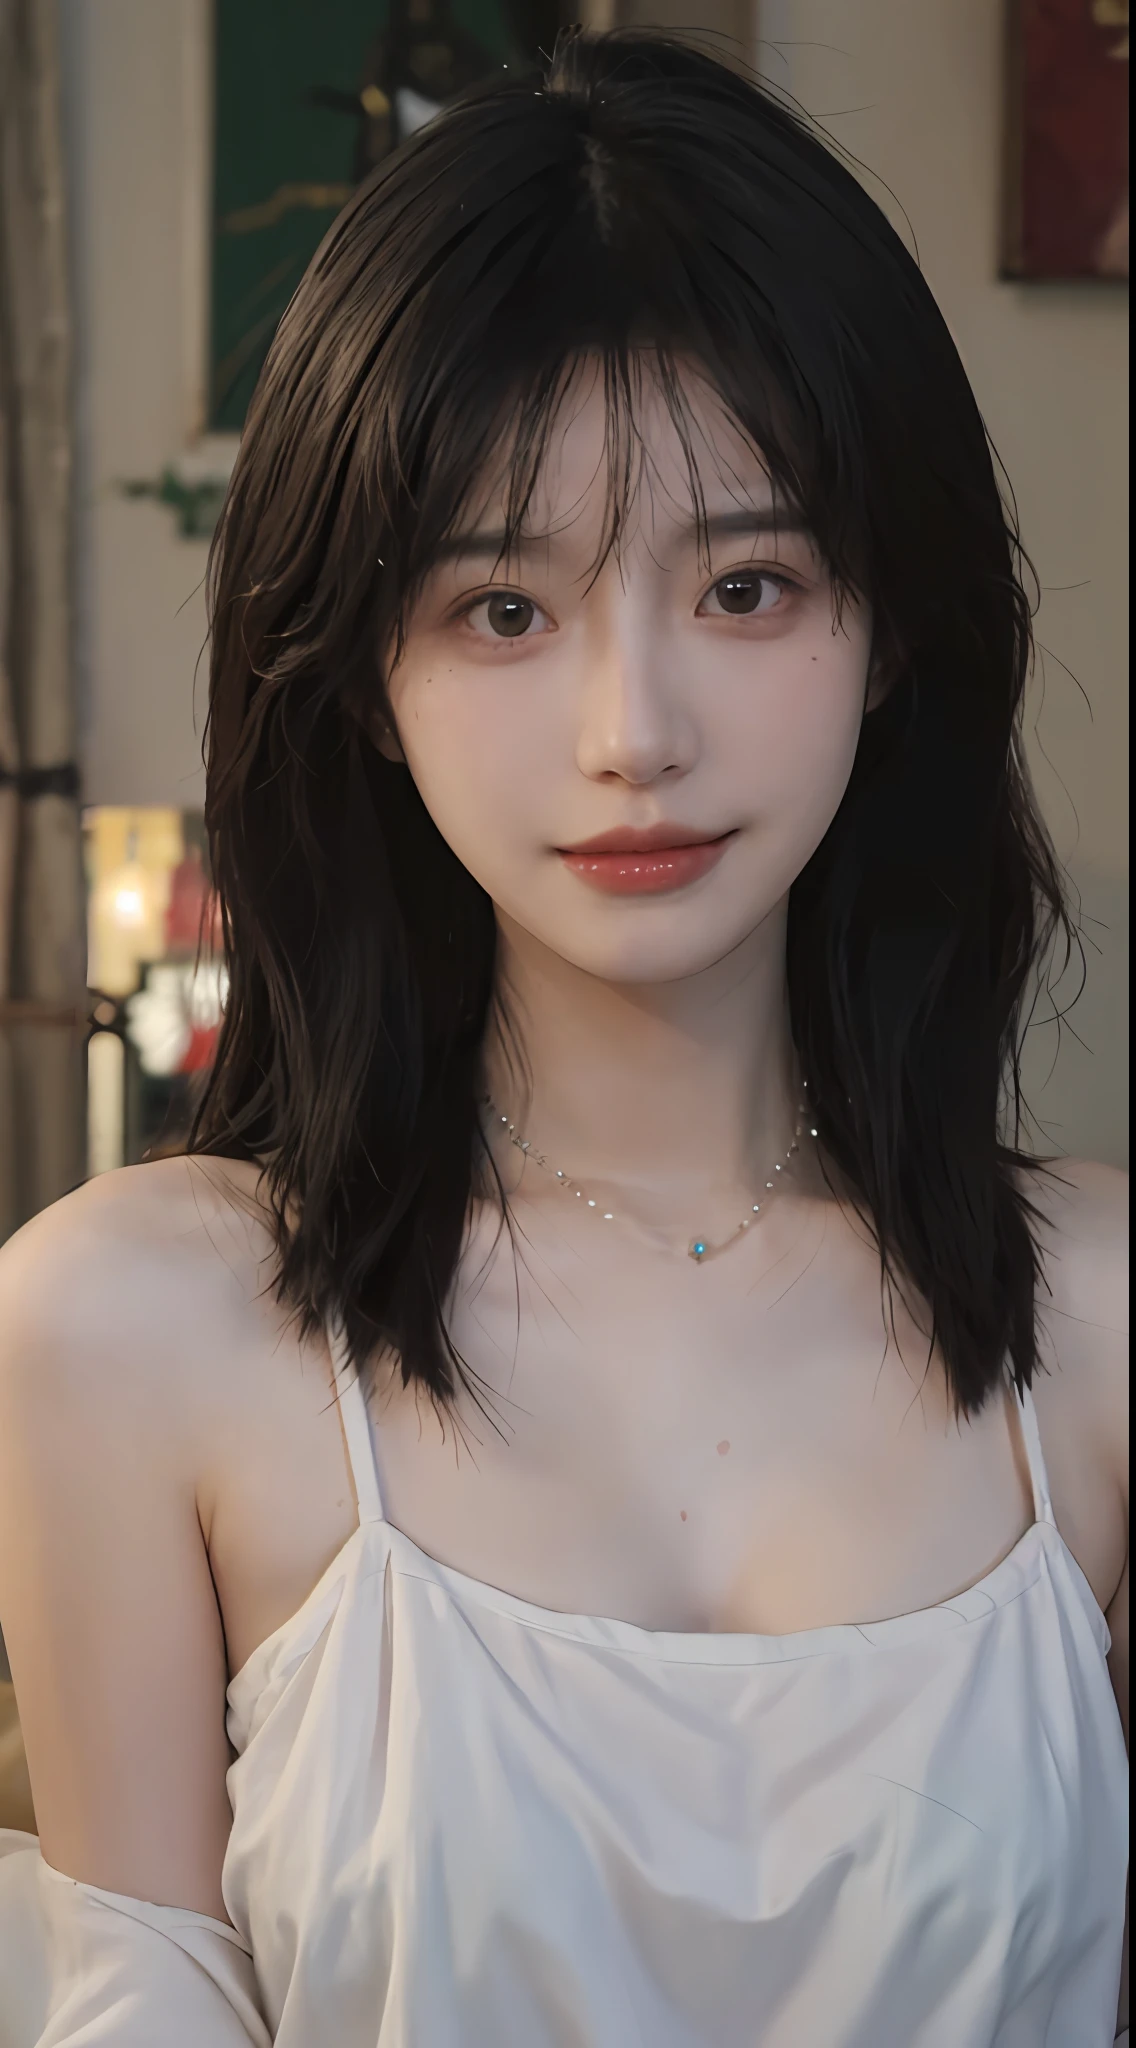 best qualtiy， Ultra-high resolution， （realisticlying：1.4），cute hairpin，Baoyu Girl，European style apartment，（flatchest：1.2） ，A pair of clear and moving peach blossom eyes,Royal Sister，sunshine on face，Big wavy hairstyle，（choker necklace：1.2），（Fair skin：1.4），a sense of atmosphere，a beauty girl， ssmile，head straight-looking at viewer， closeup cleavage ，(Photorealistic:1.4),1girll,sexly,(Upper body:1.4),(Wet body),(:1.2)